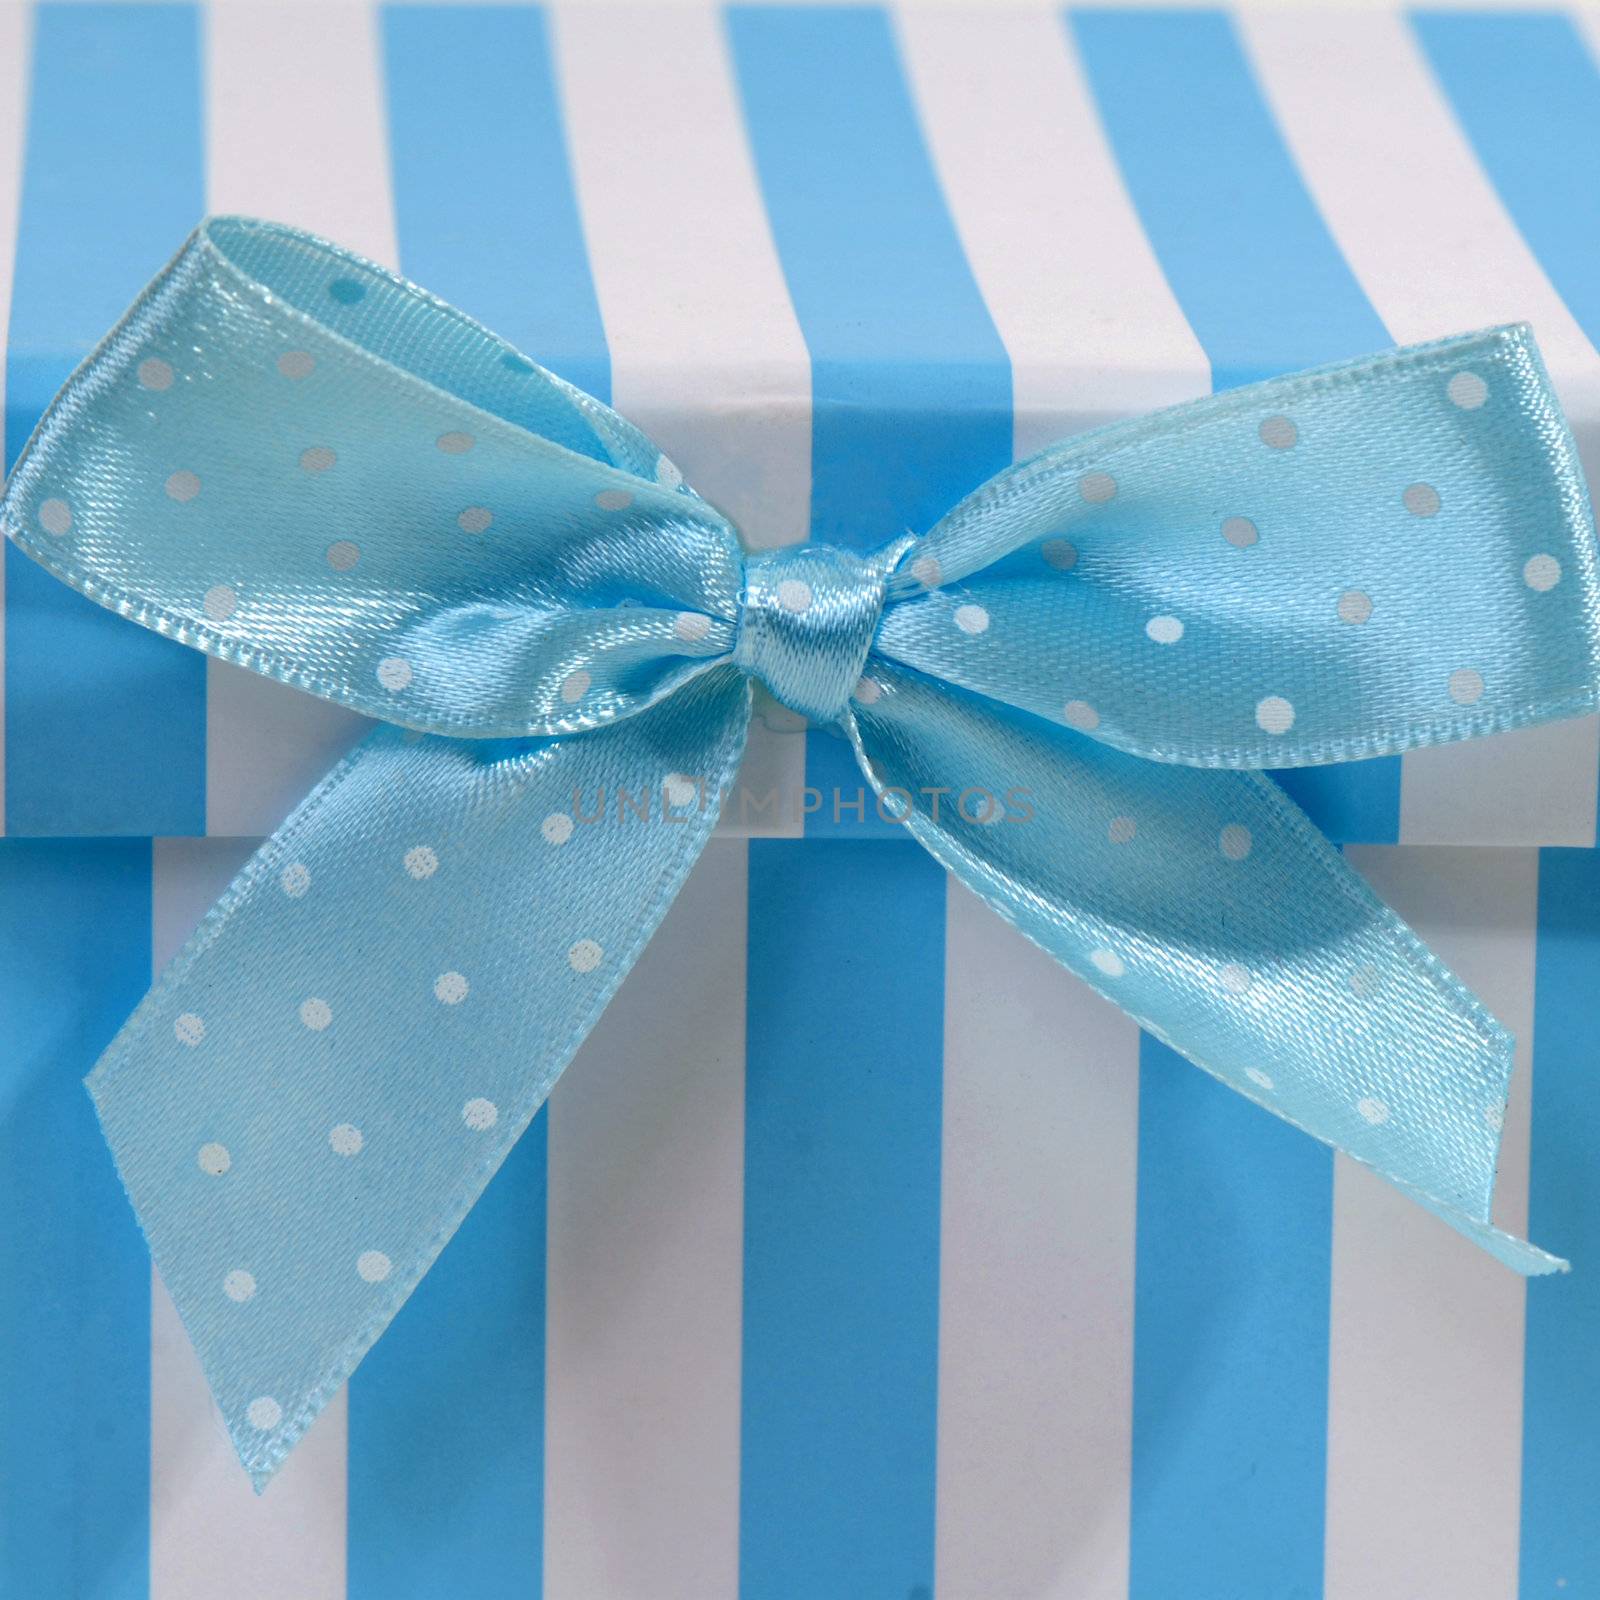 blue and white box with ribbon for gift